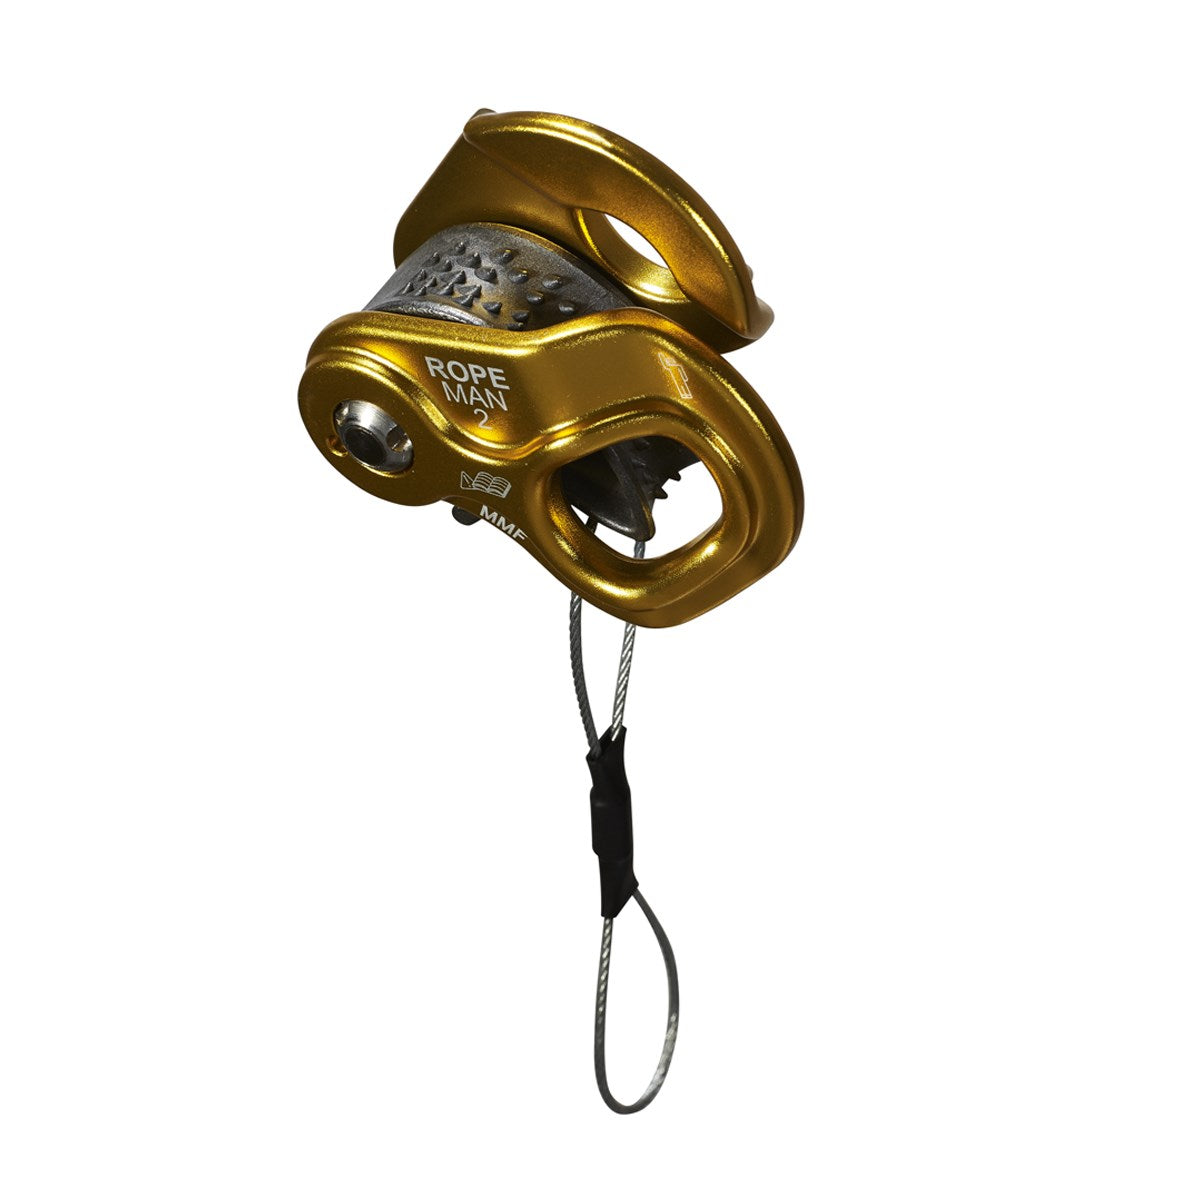 Wild Country Ropeman 2 Ascender - Gold